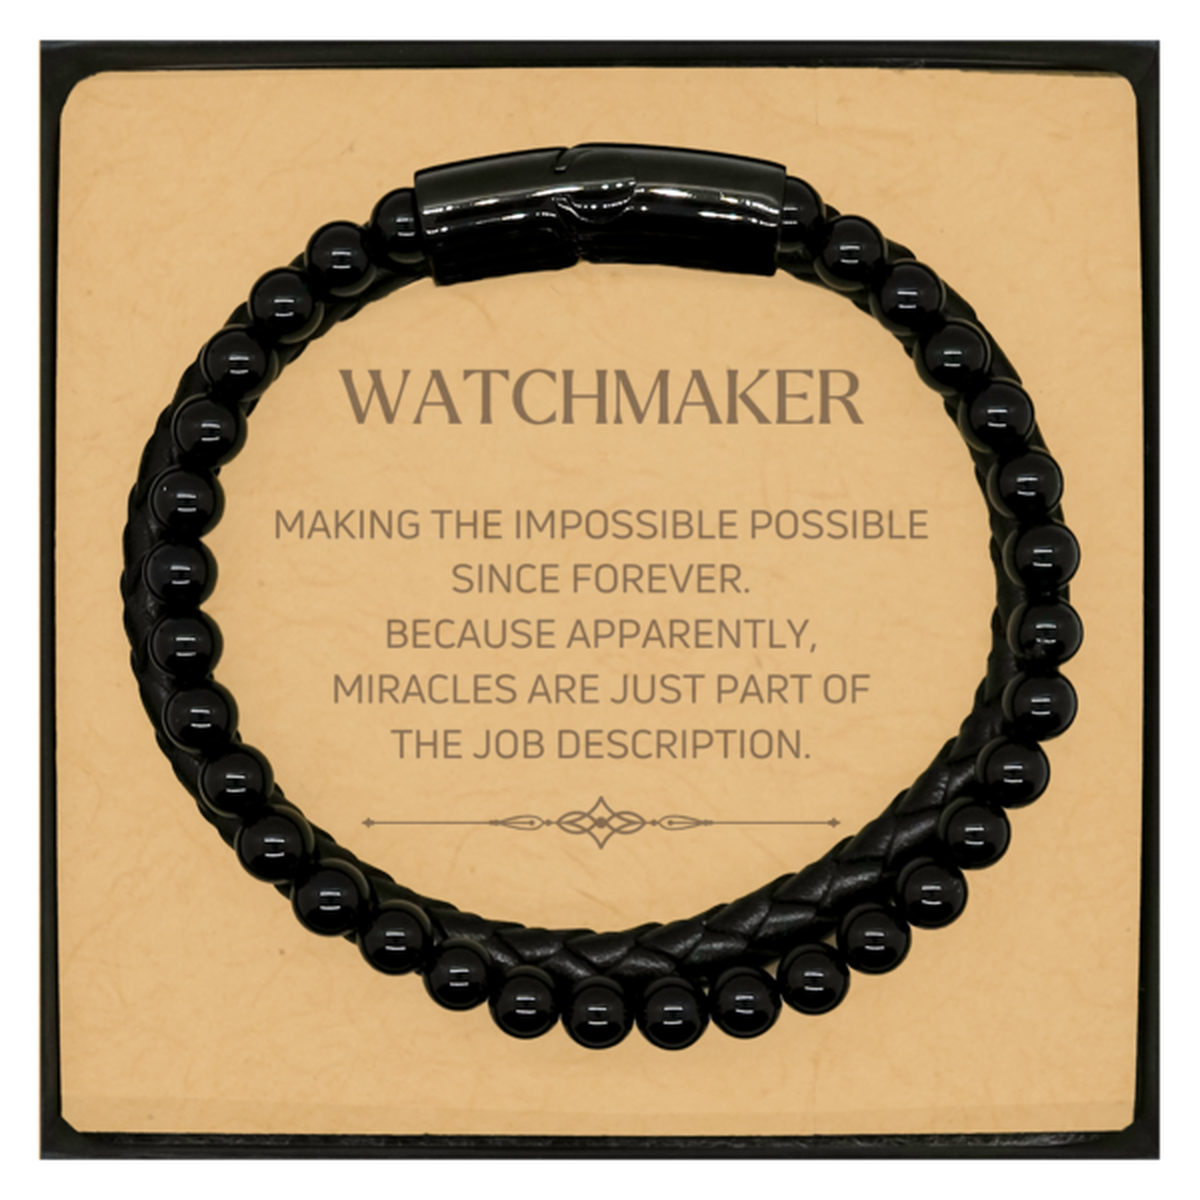 Funny Watchmaker Gifts, Miracles are just part of the job description, Inspirational Birthday Christmas Stone Leather Bracelets For Watchmaker, Men, Women, Coworkers, Friends, Boss